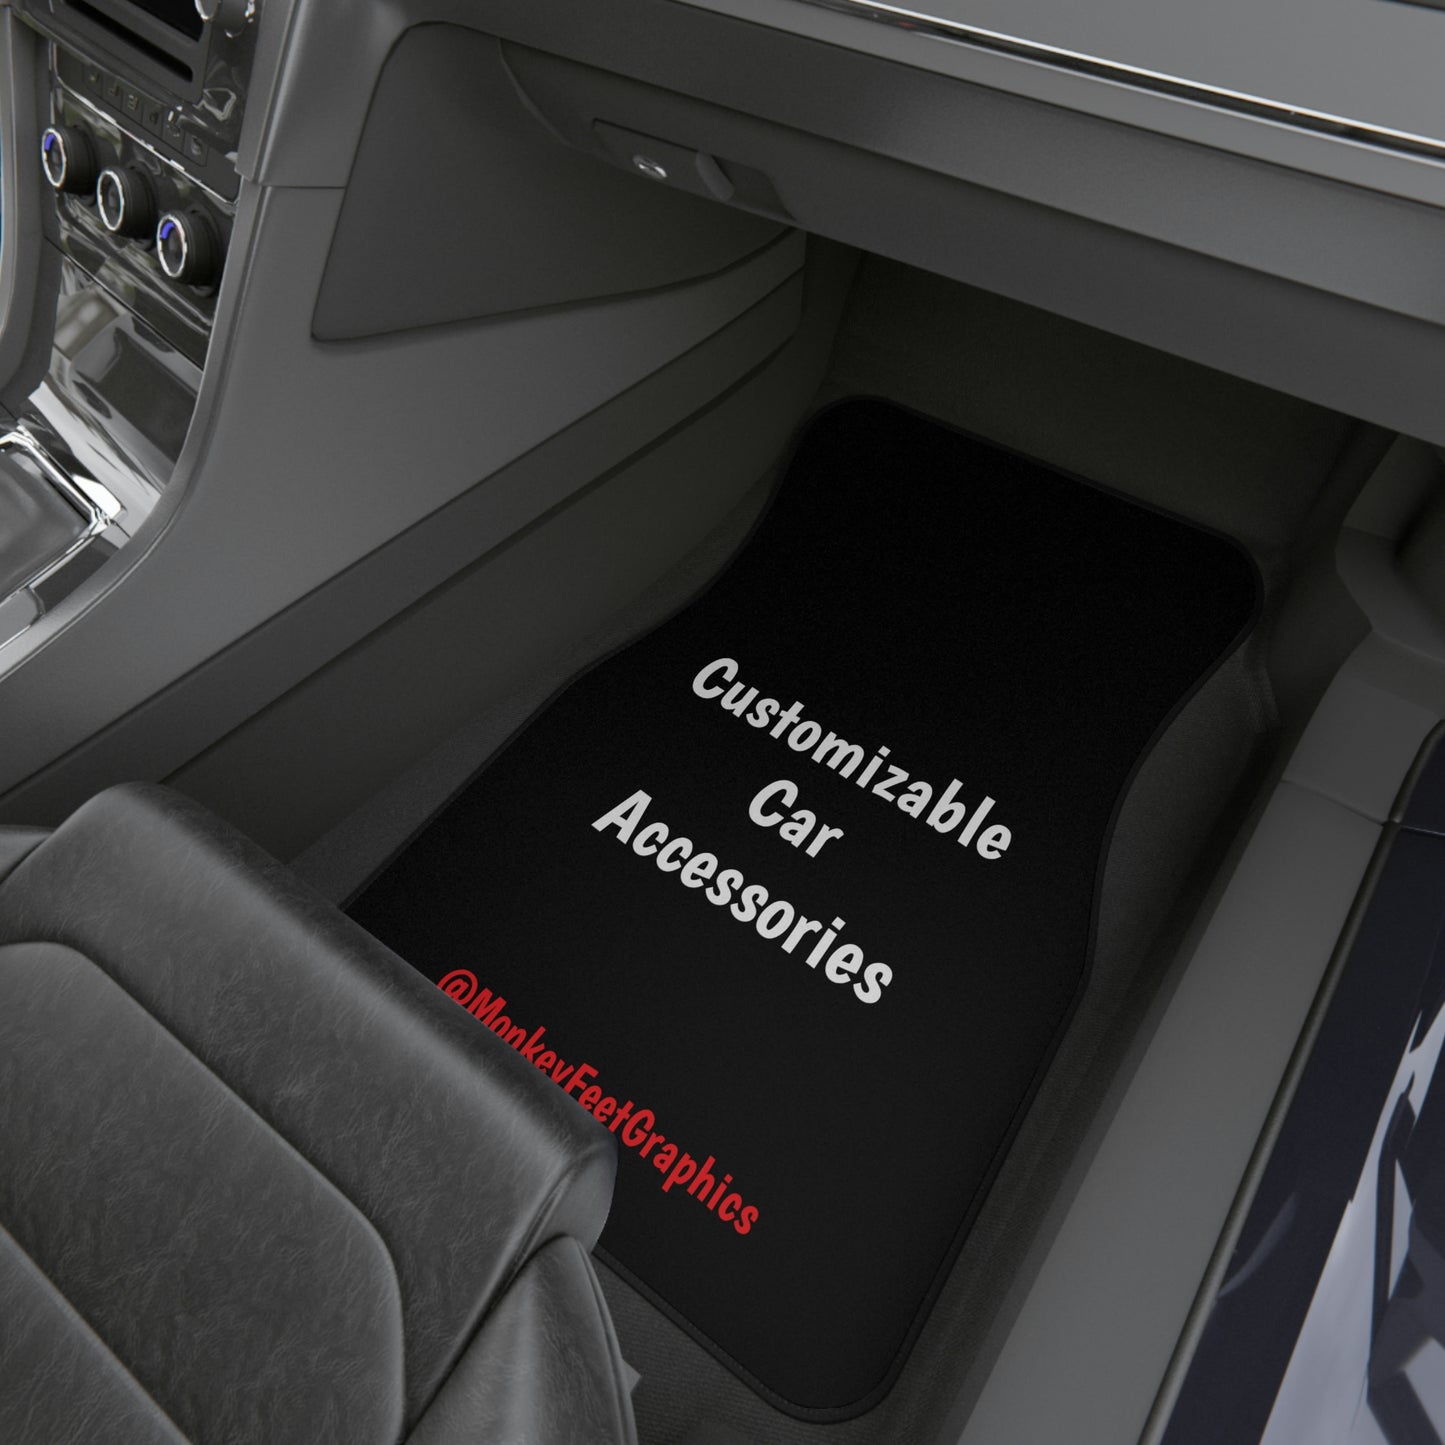 Set of 4 Custom Car Floor Mats Accessories Interior Vehicle Décor Promotional Products New Car Gifts Personalized Items